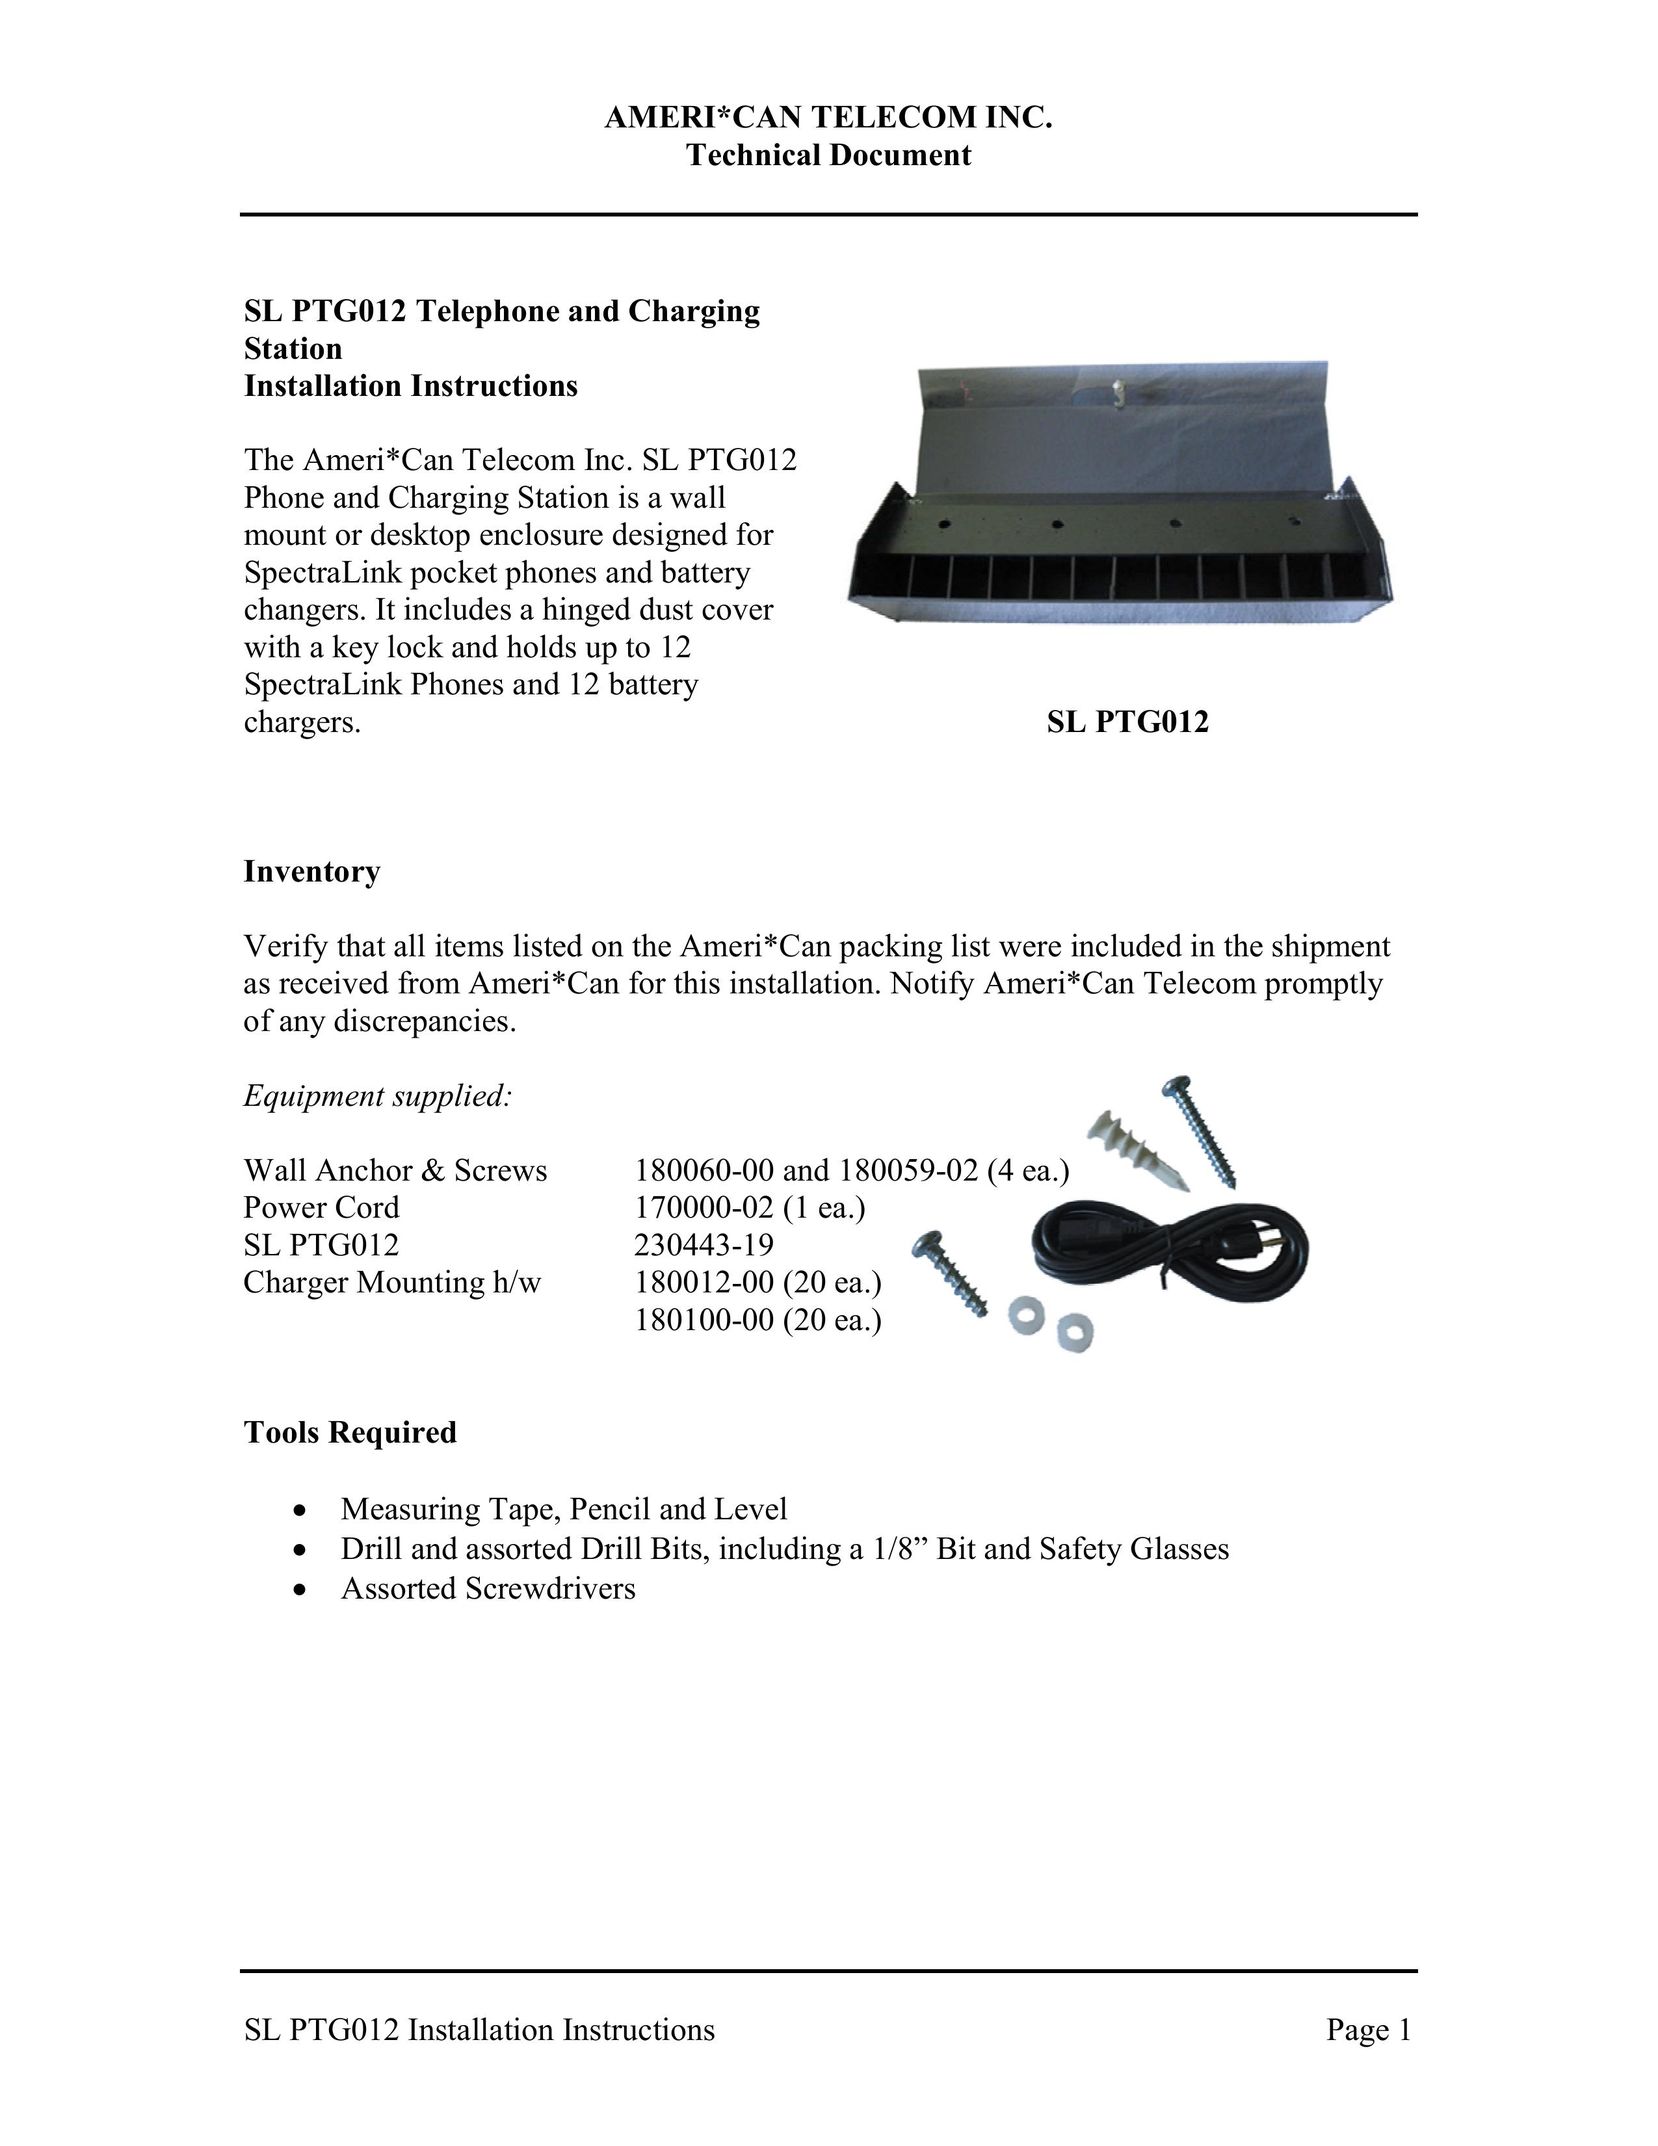 American Telecom SL PTG012 Cell Phone User Manual (Page 1)